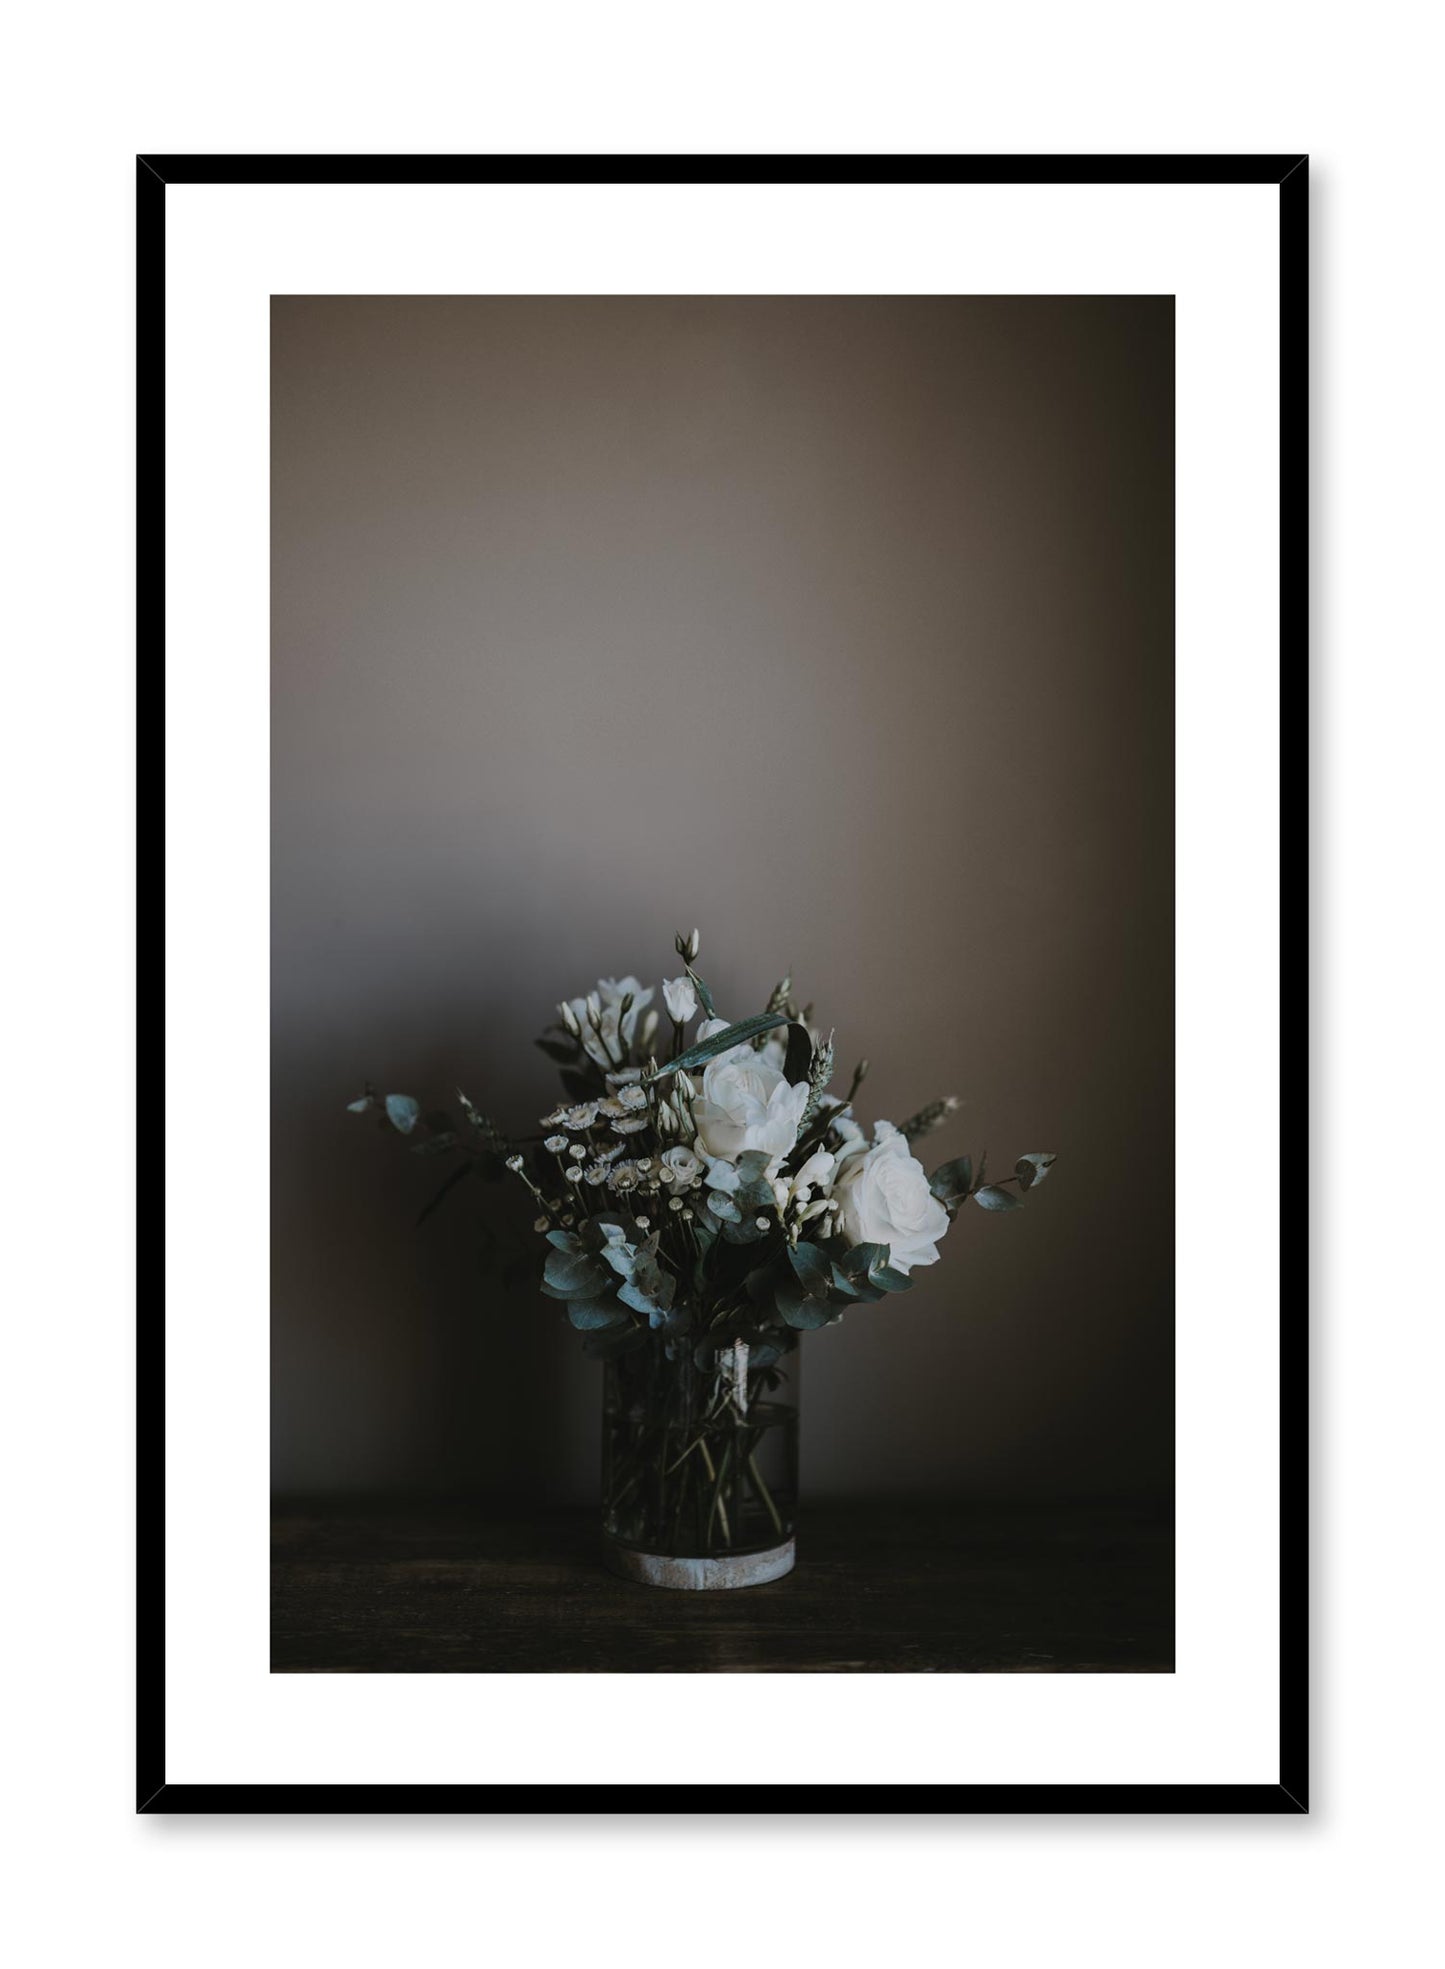 Minimalist design poster by Opposite Wall with elegant bouquet photography